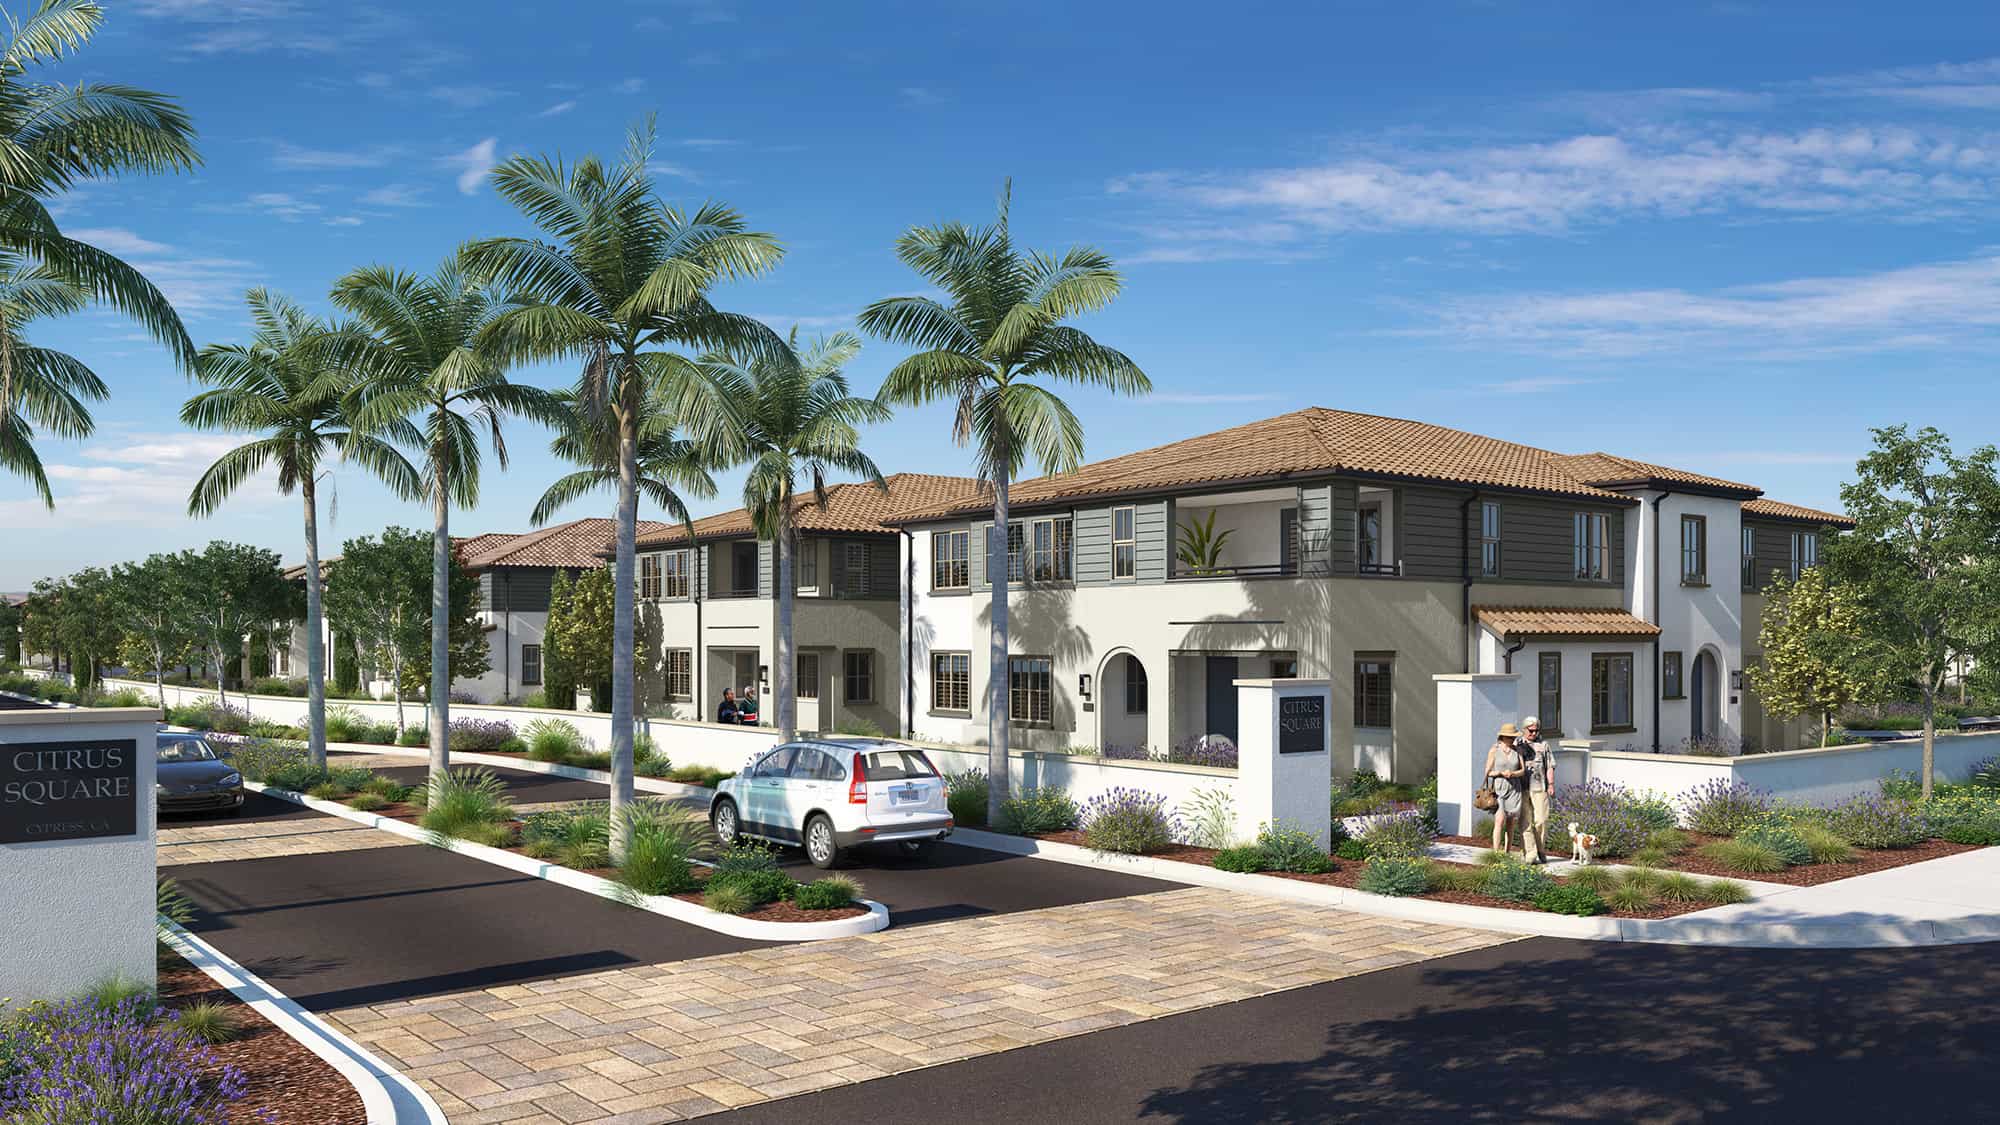 Community Exterior rendering of Citrus Square by Melia Homes in Cypress, CA